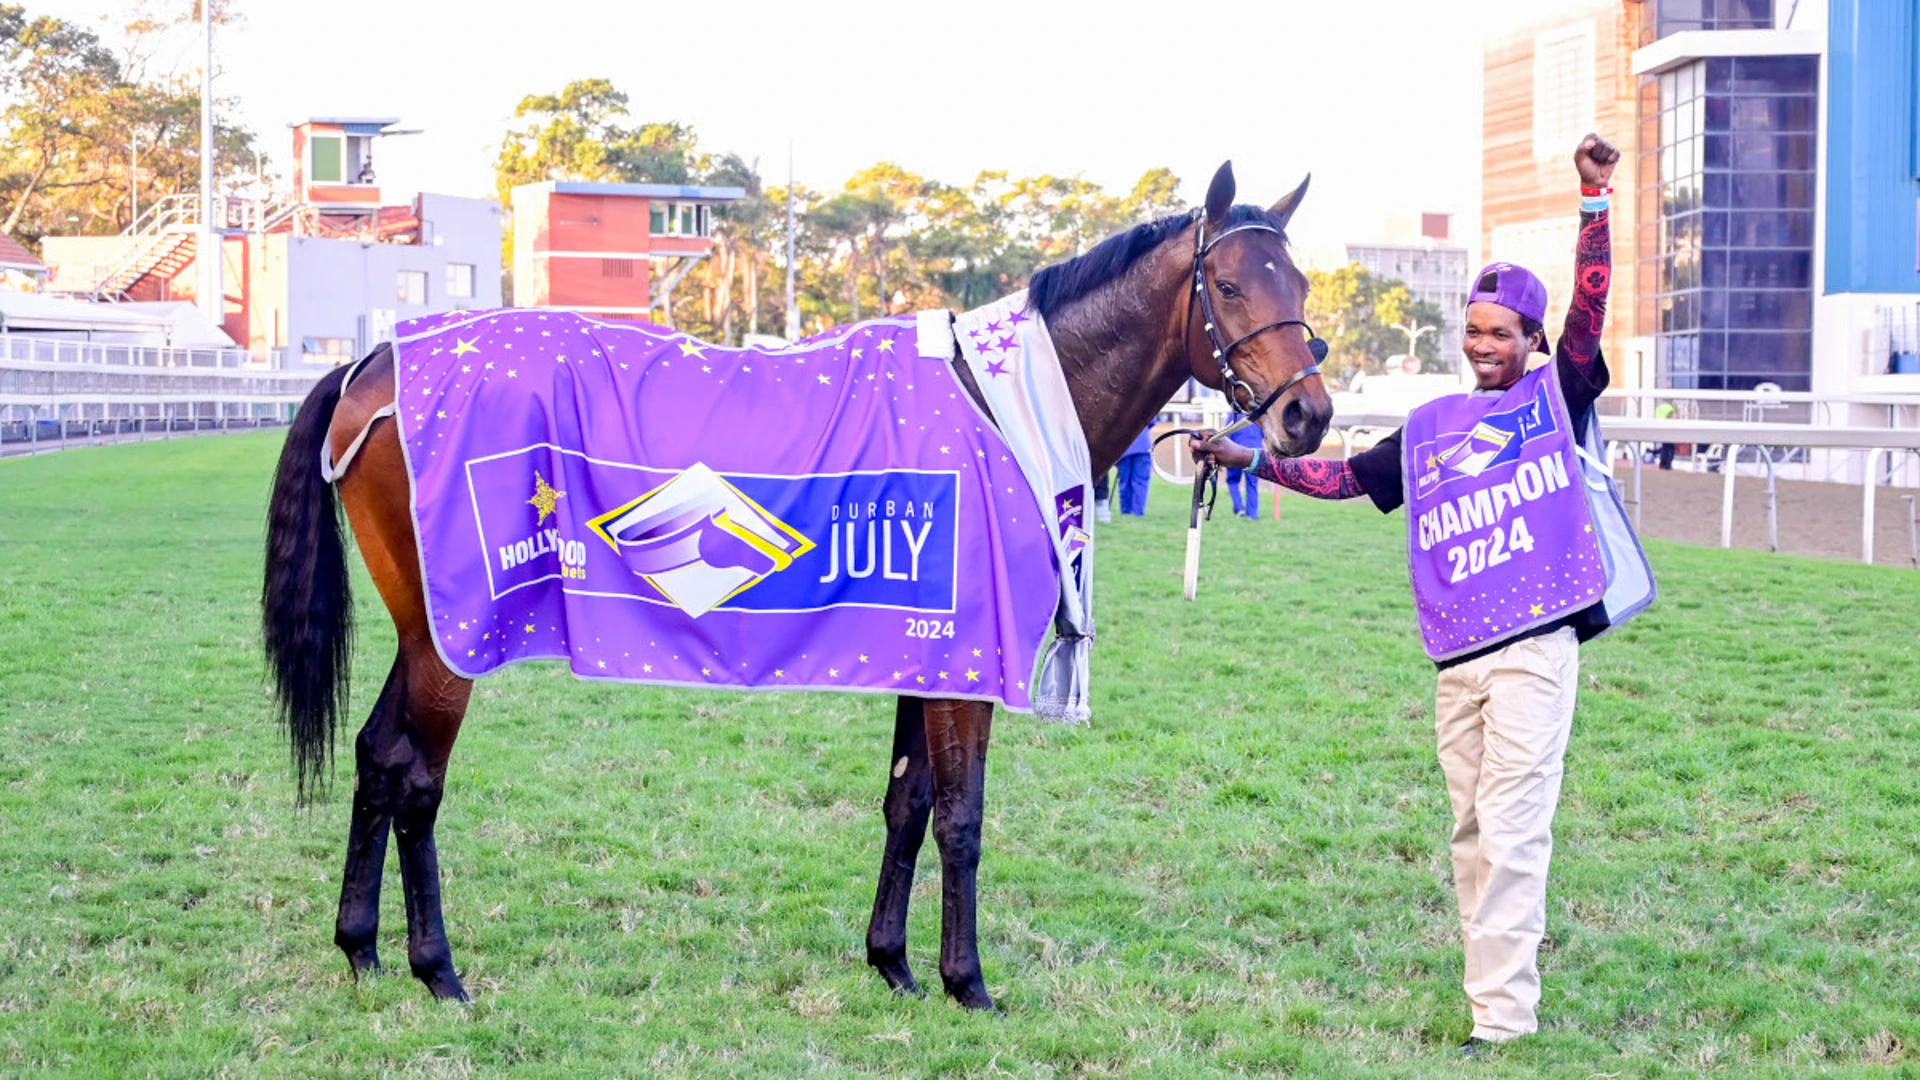 Crawford gets back-to-back wins at Durban July